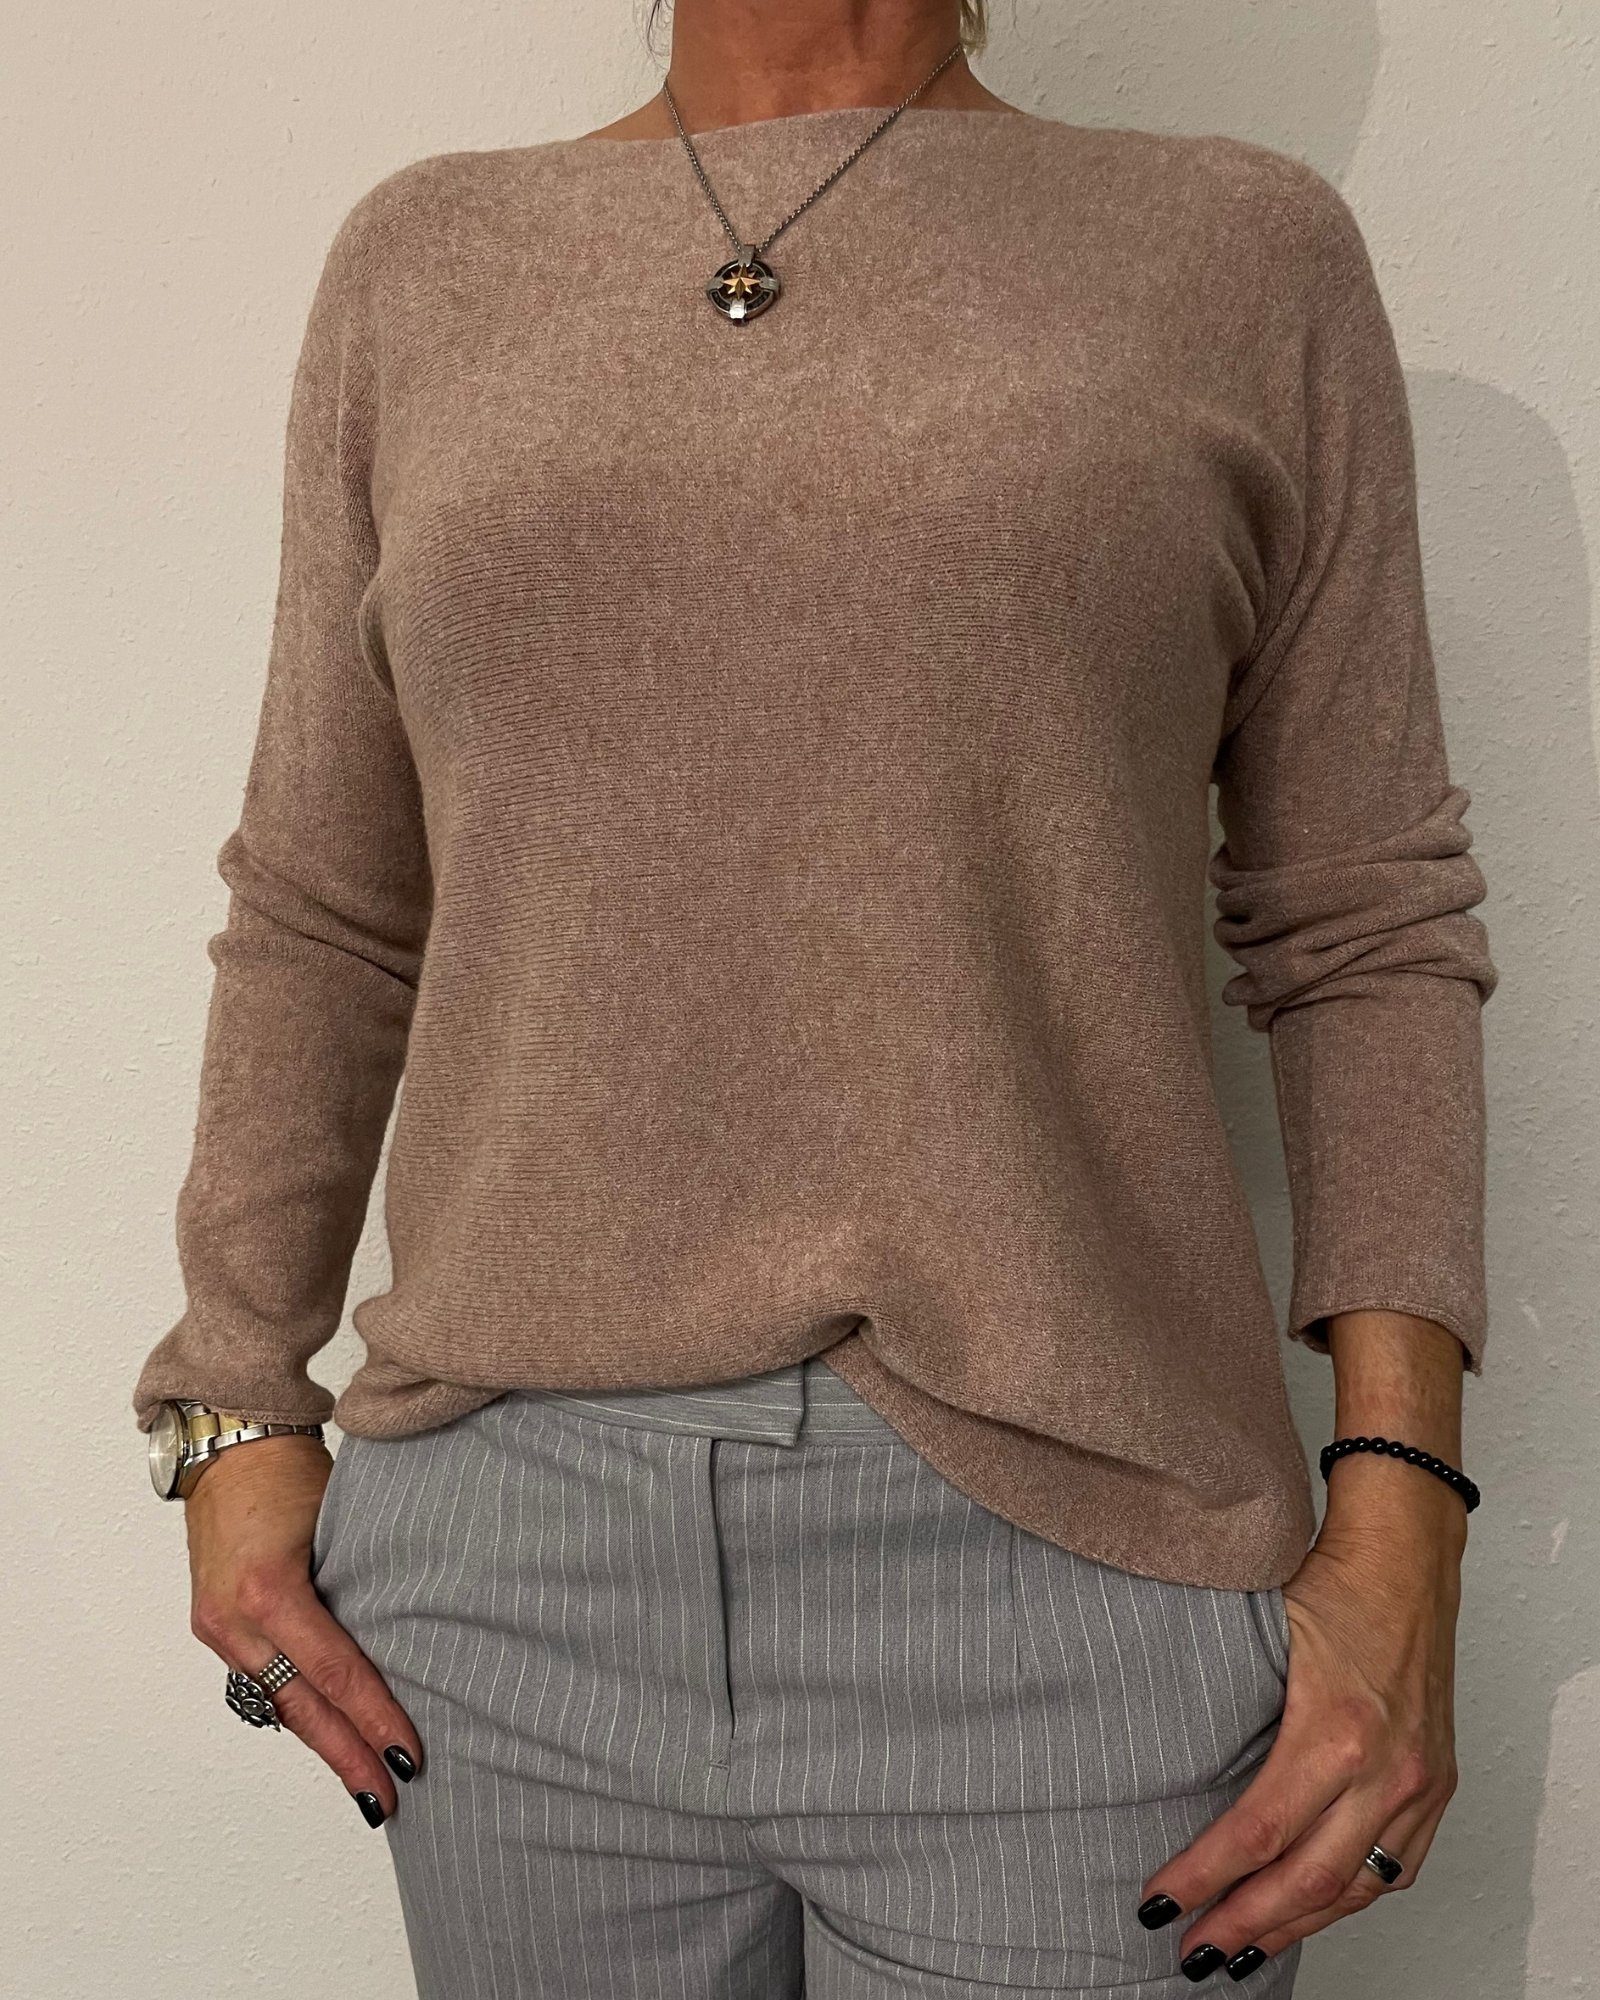 ITALY VIBES Strickpullover LIV - Basic Pullover - U-Boot Ausschnitt - ONE SIZE passt hier Gr. S - XL taupe